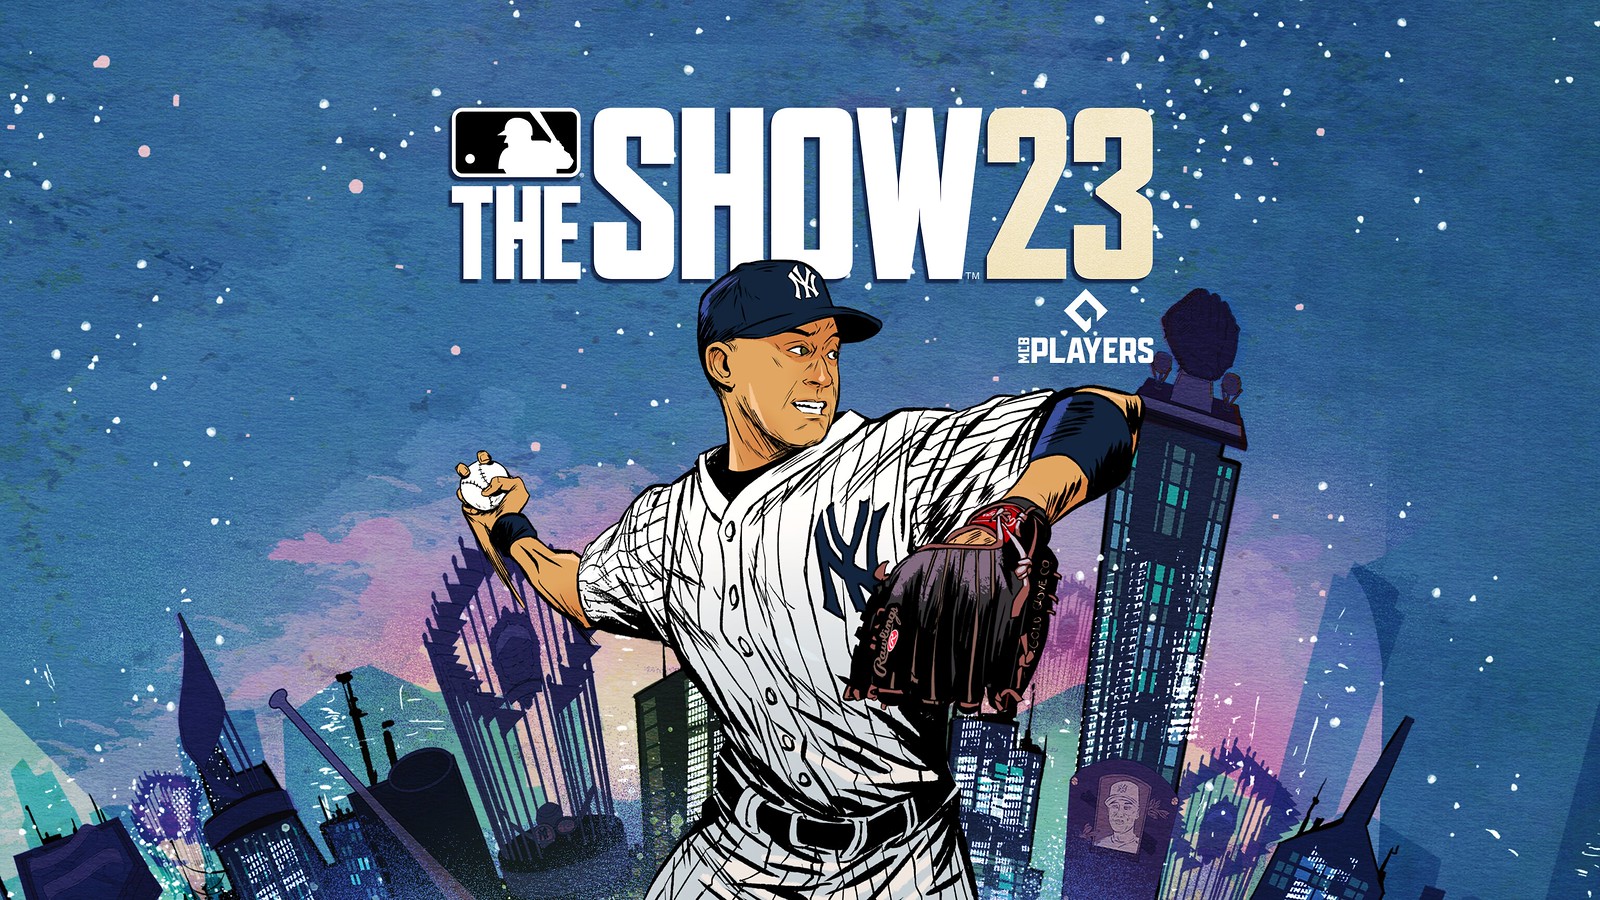 MLB The Show 21 for PlayStation 4